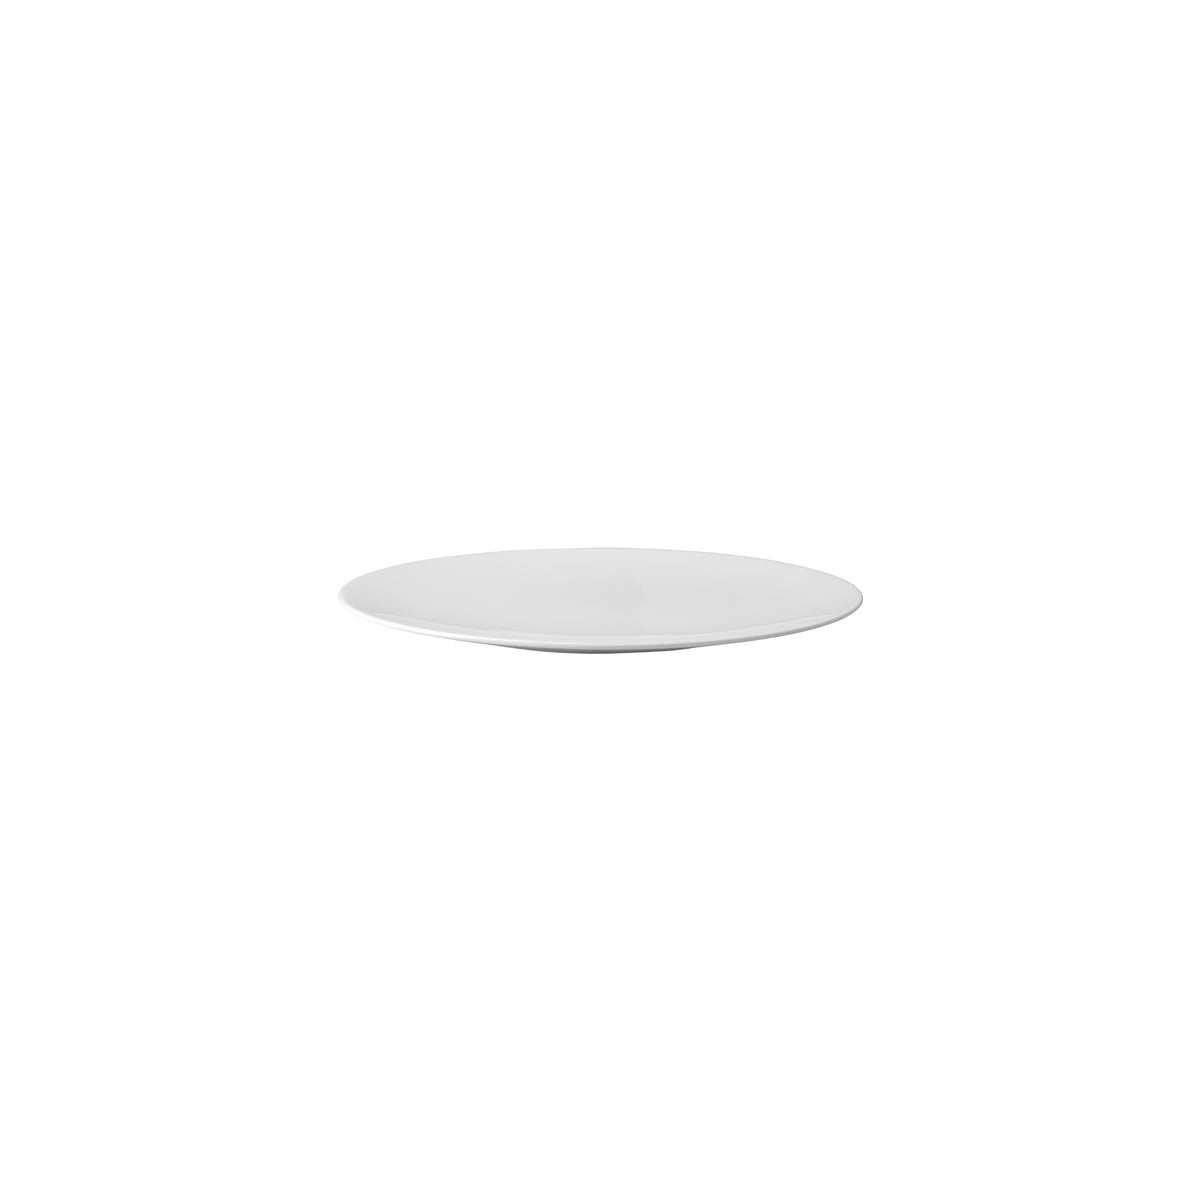 VB16-3272-2620 Villeroy And Boch Villeroy And Boch Stella Hotel White Coupe Plate 270x270x20mm Tomkin Australia Hospitality Supplies